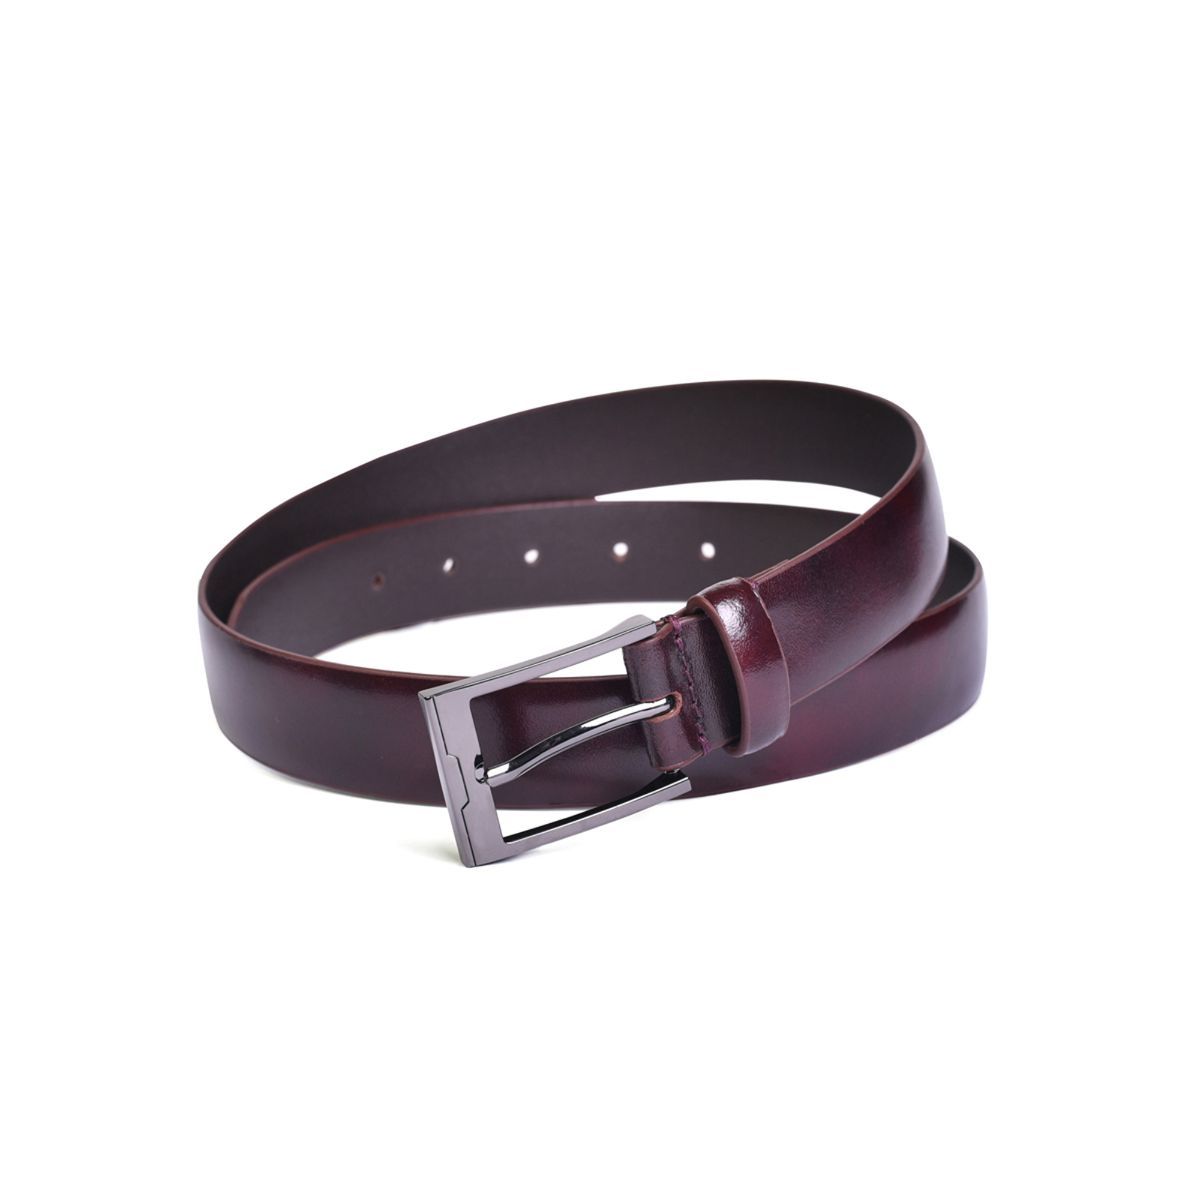 Belwaba Genuine Italian Leather Navy Mens Belt With Shiny Gunmetal Finished Buckle (42) (Navy Blue) At Nykaa, Best Beauty Products Online